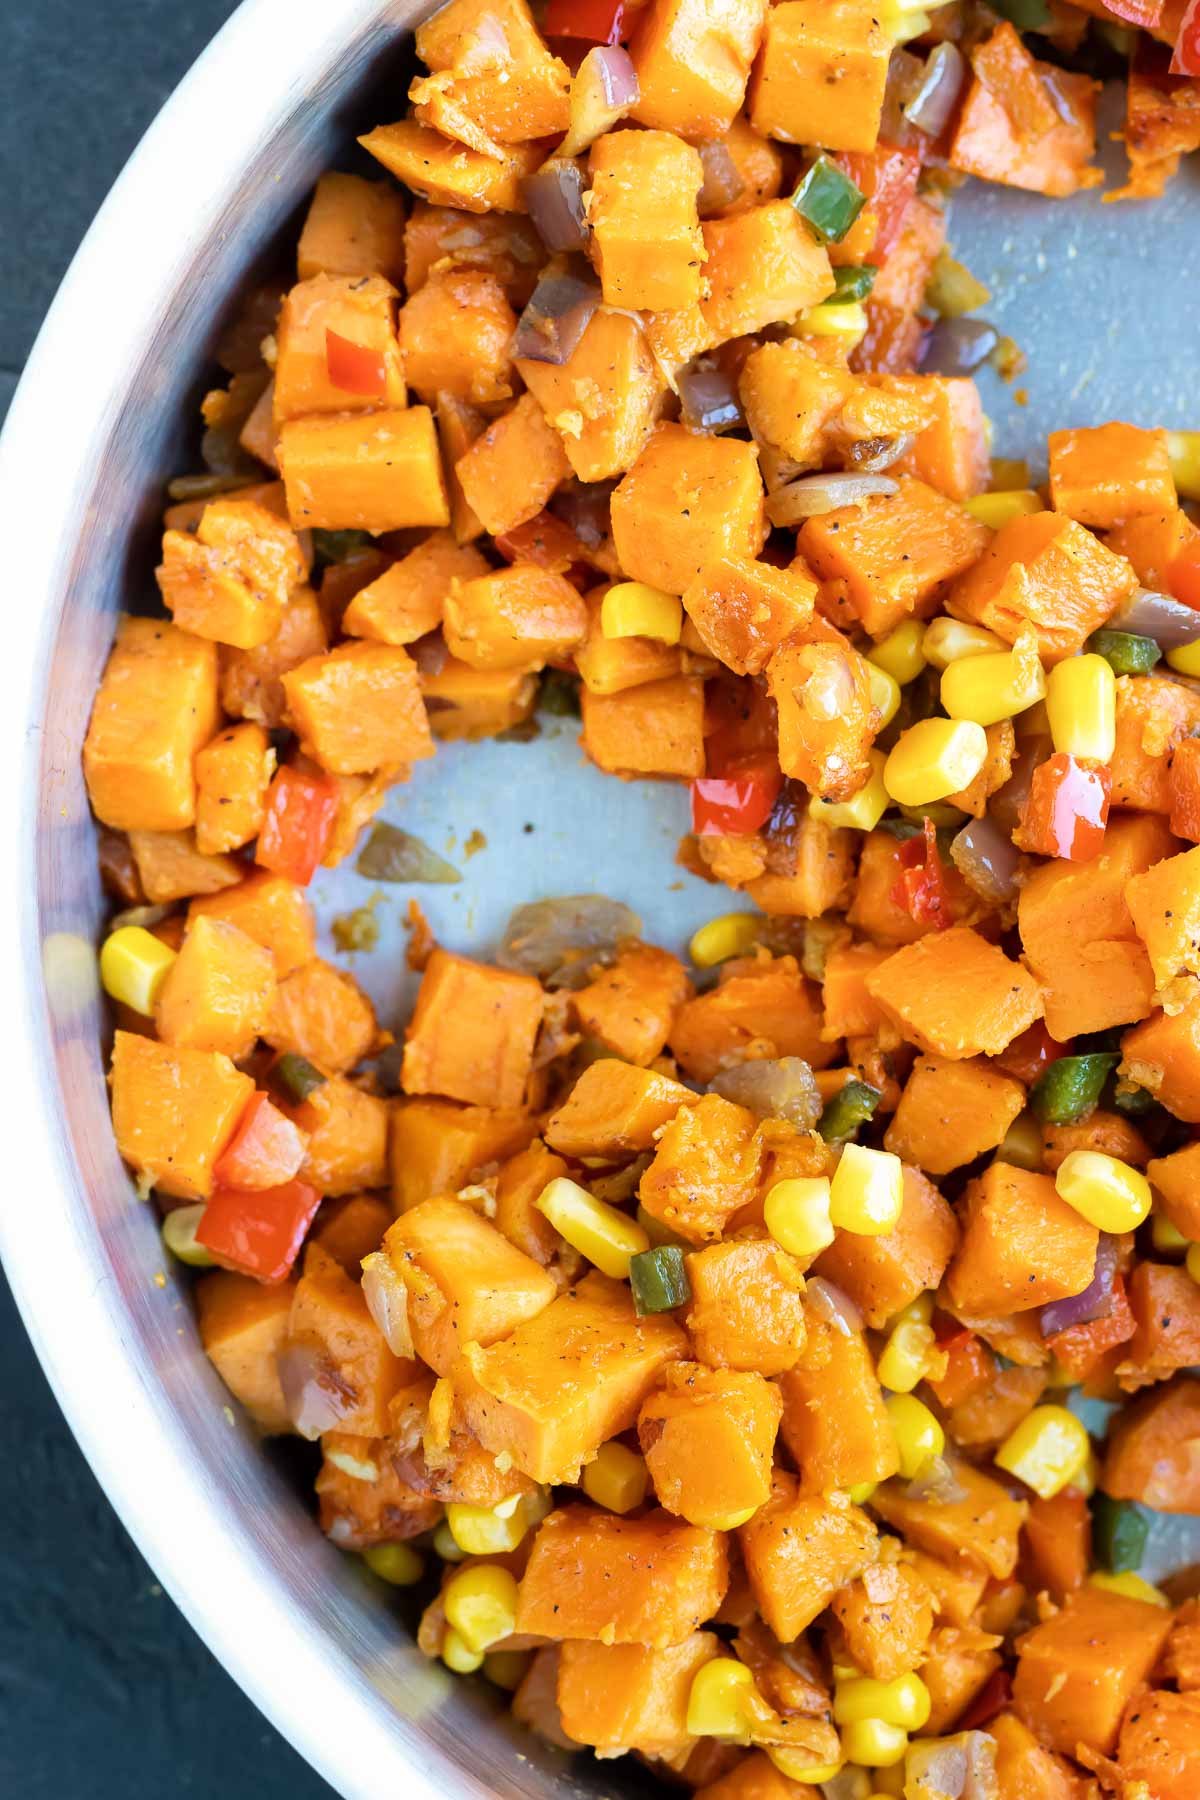 Sweet potatoes are added to the pan.